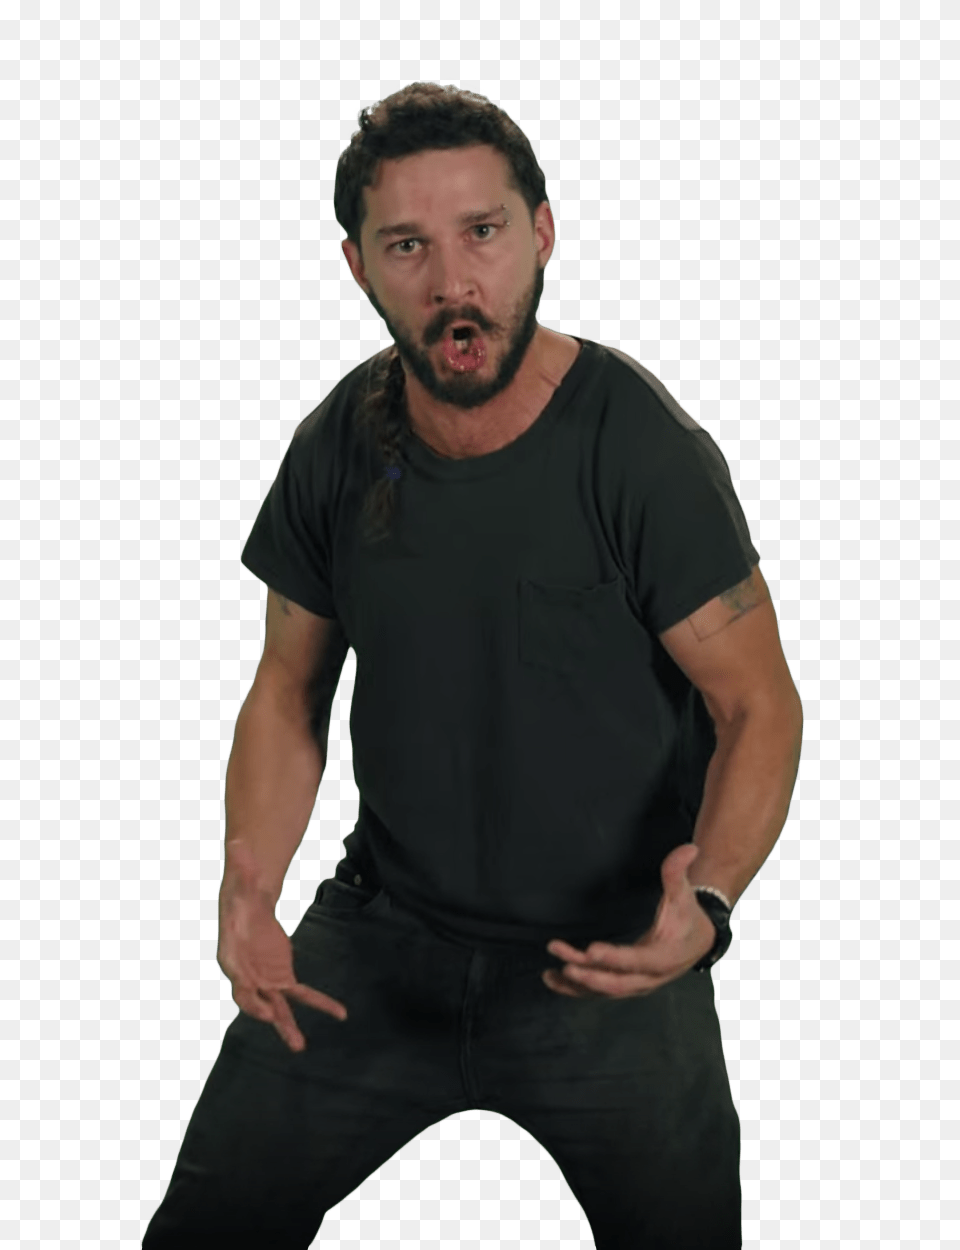 Just Do It Shia Labeouf Pose, Portrait, Face, Head, Photography Free Png Download